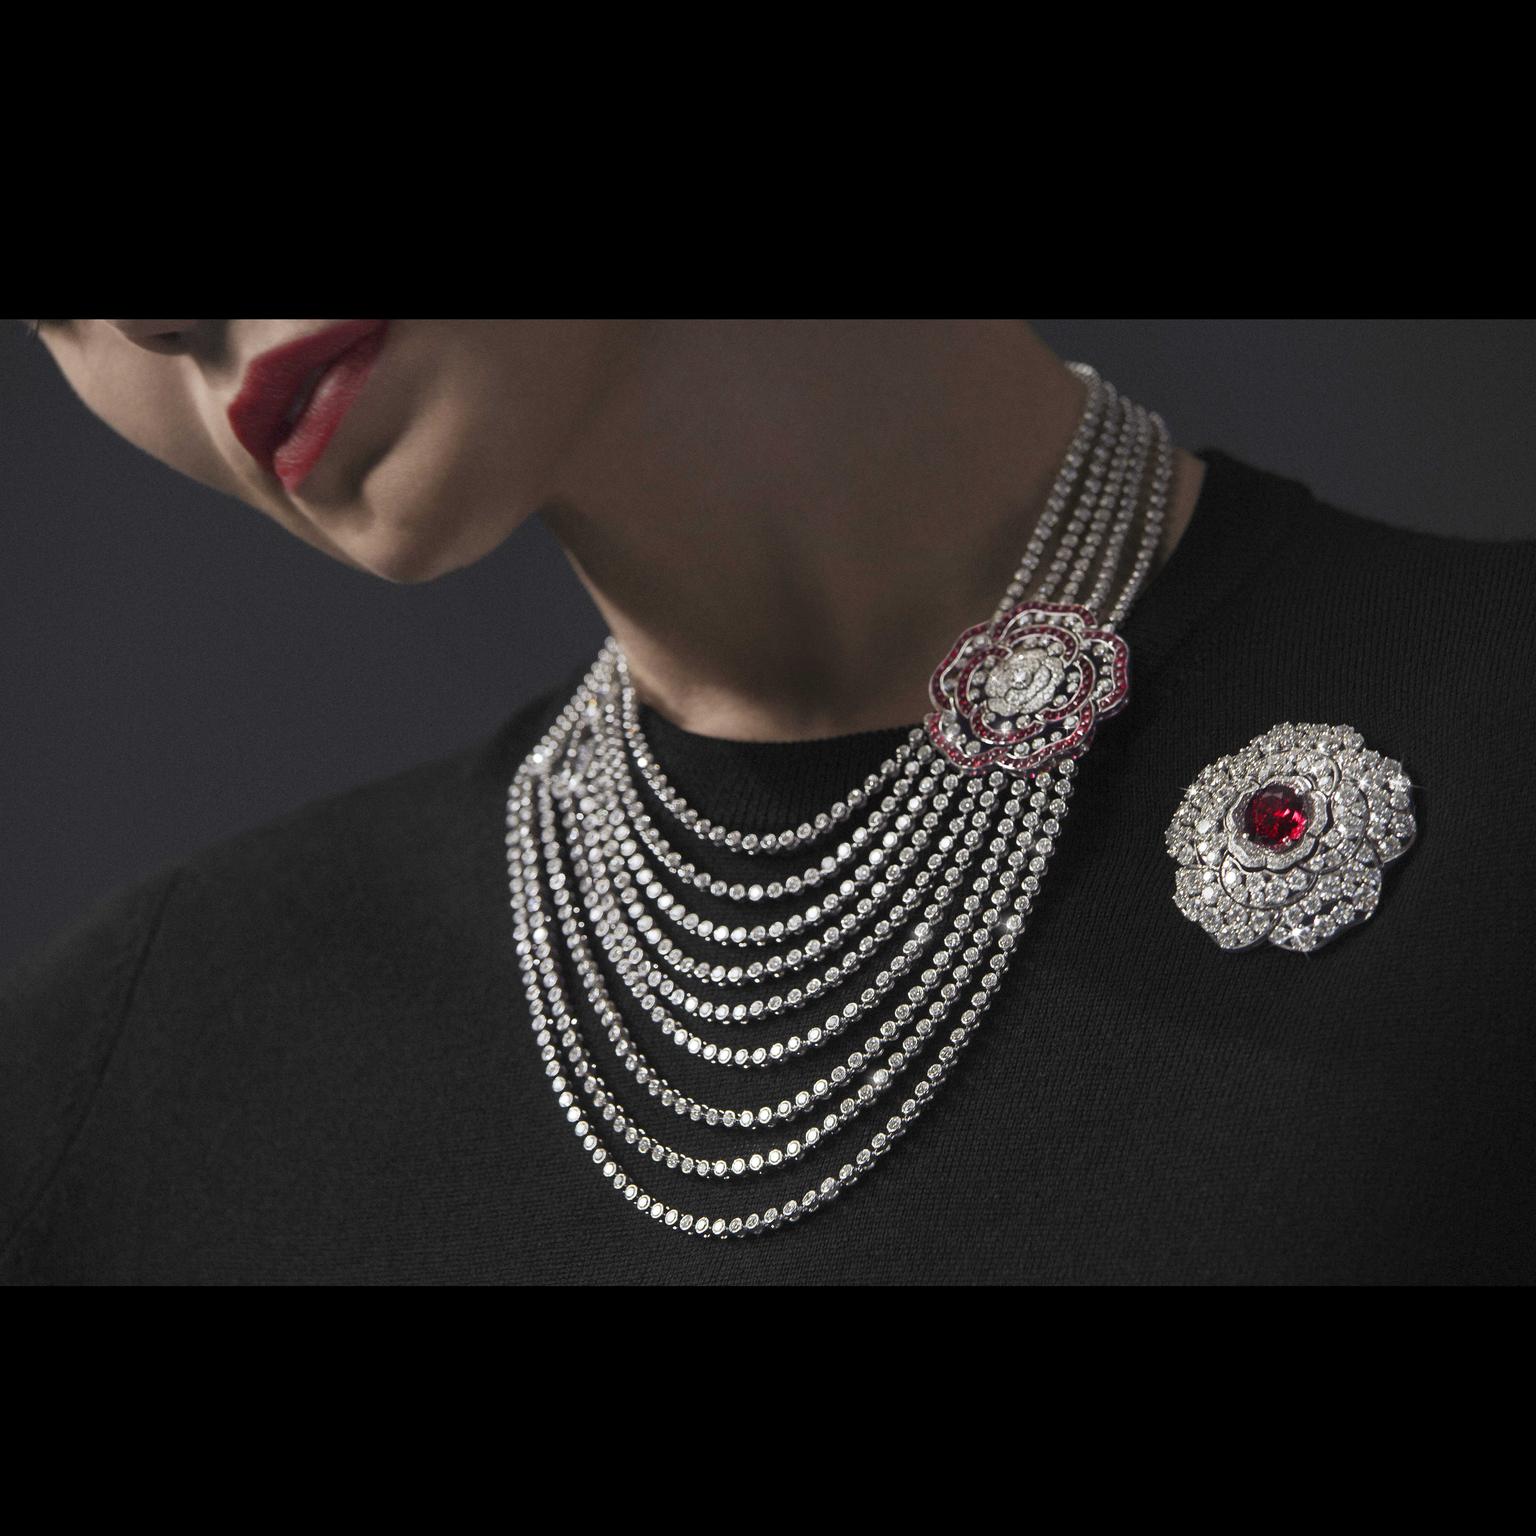 A look at Chanel's  camellia diamond jewels | The Jewellery Editor